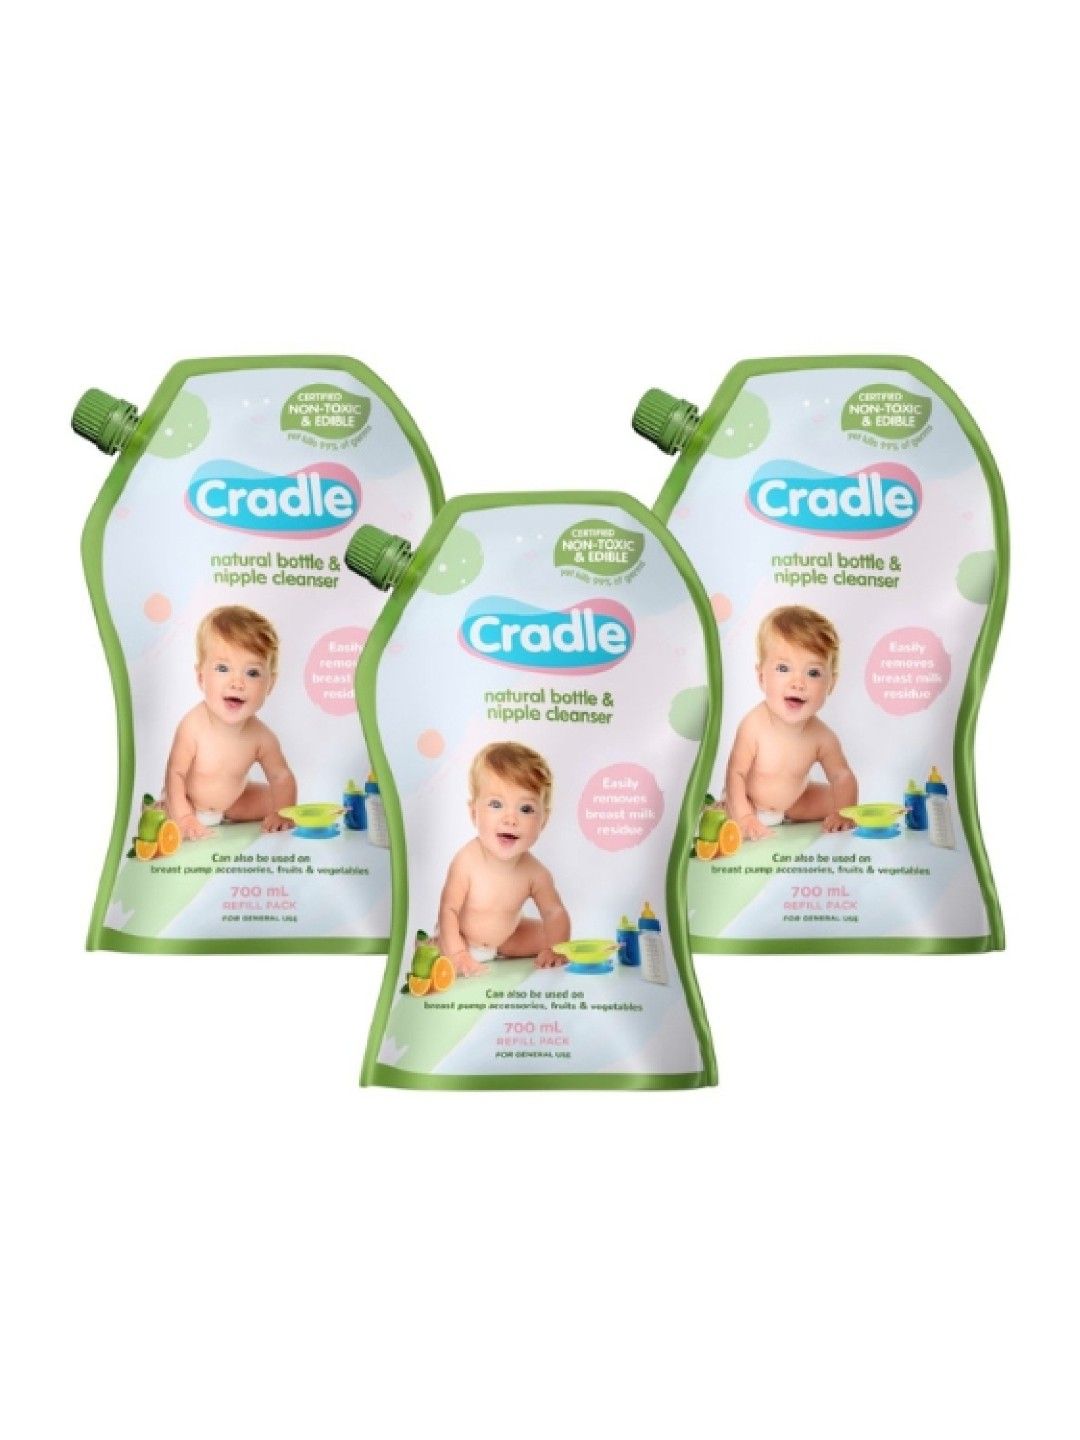 Cradle Baby Bottle and Nipple Cleanser 700ml Refill x3